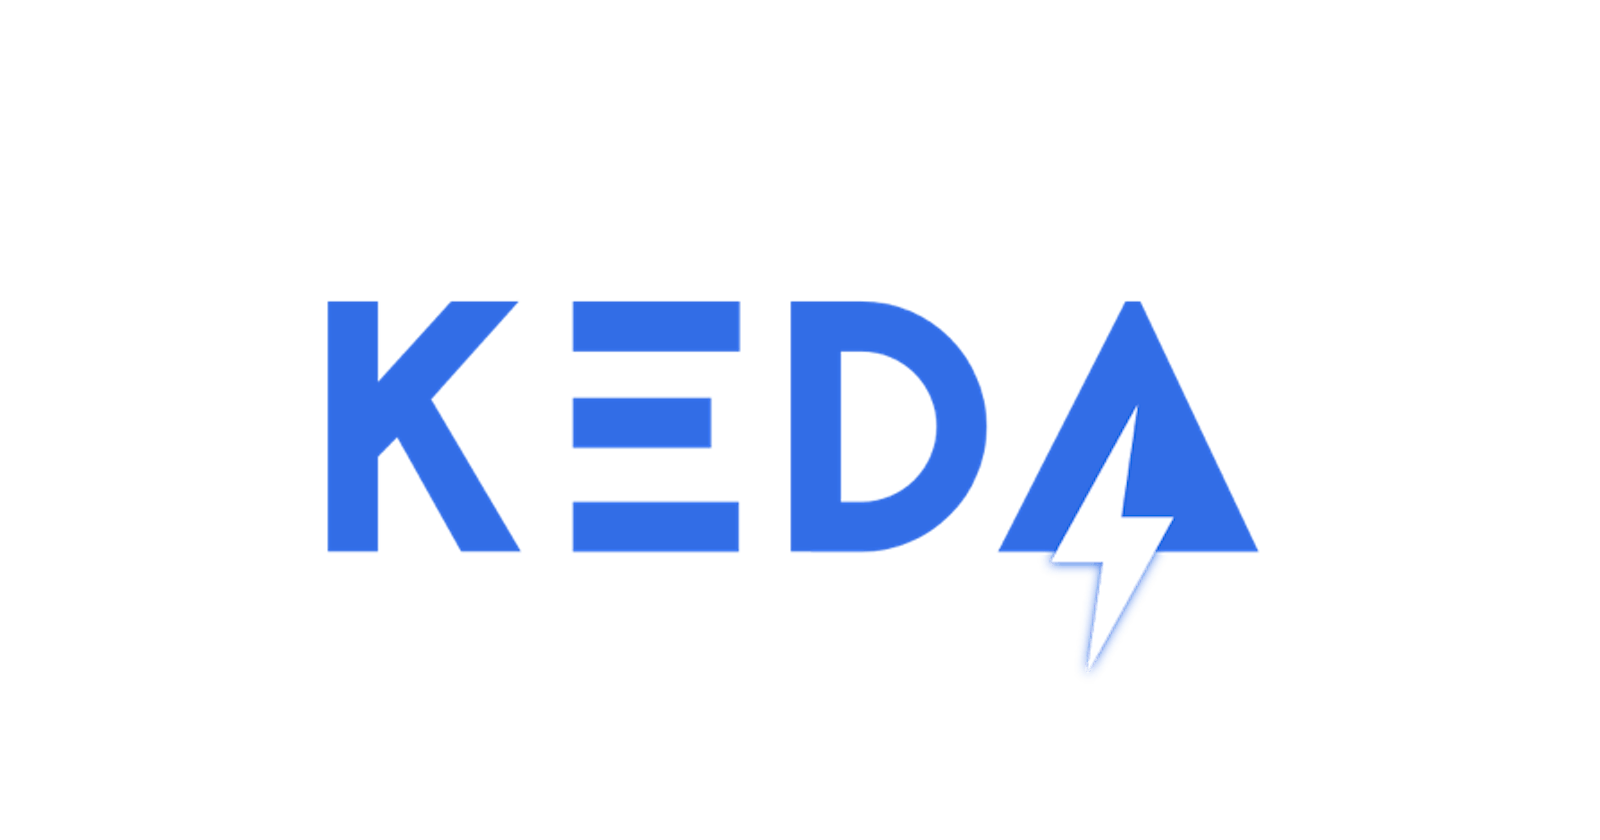 KEDA: Scaling Your Applications Made Easy